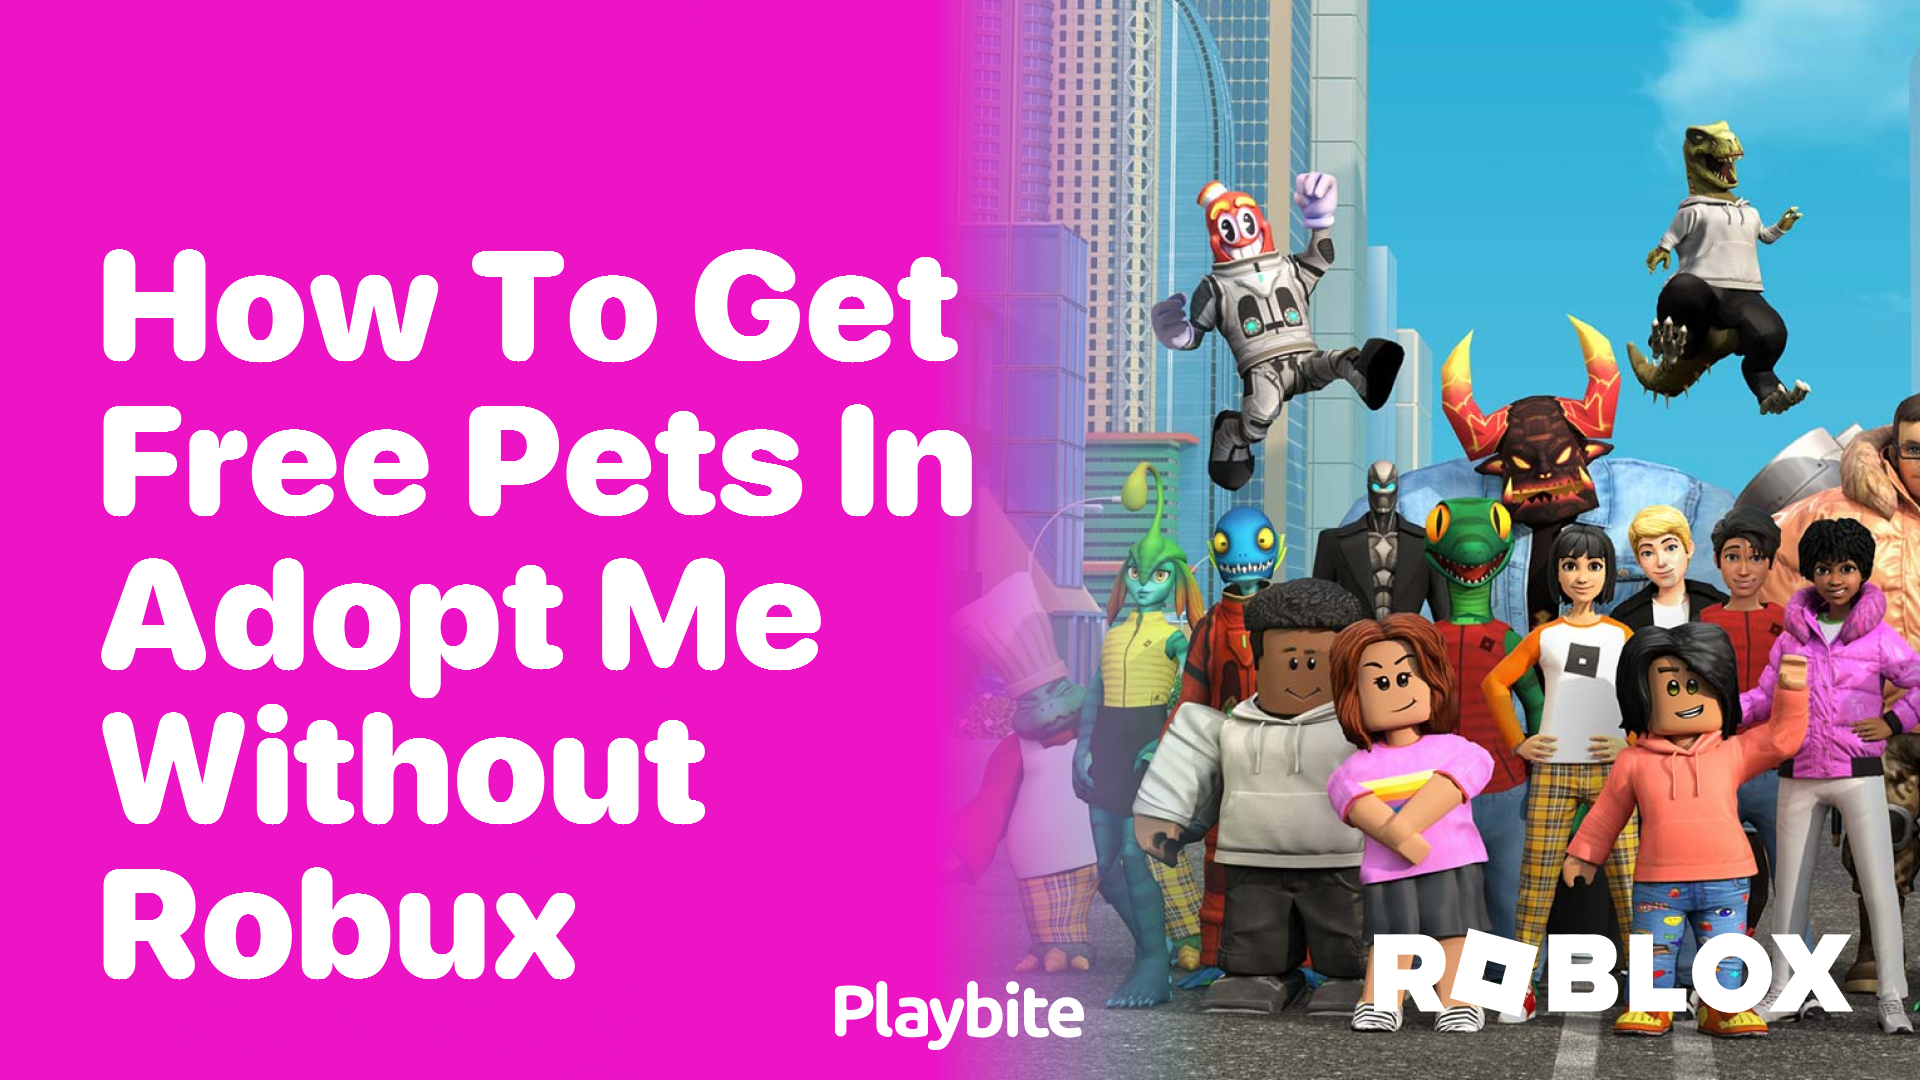 How to Get Free Pets in Adopt Me Without Spending Robux